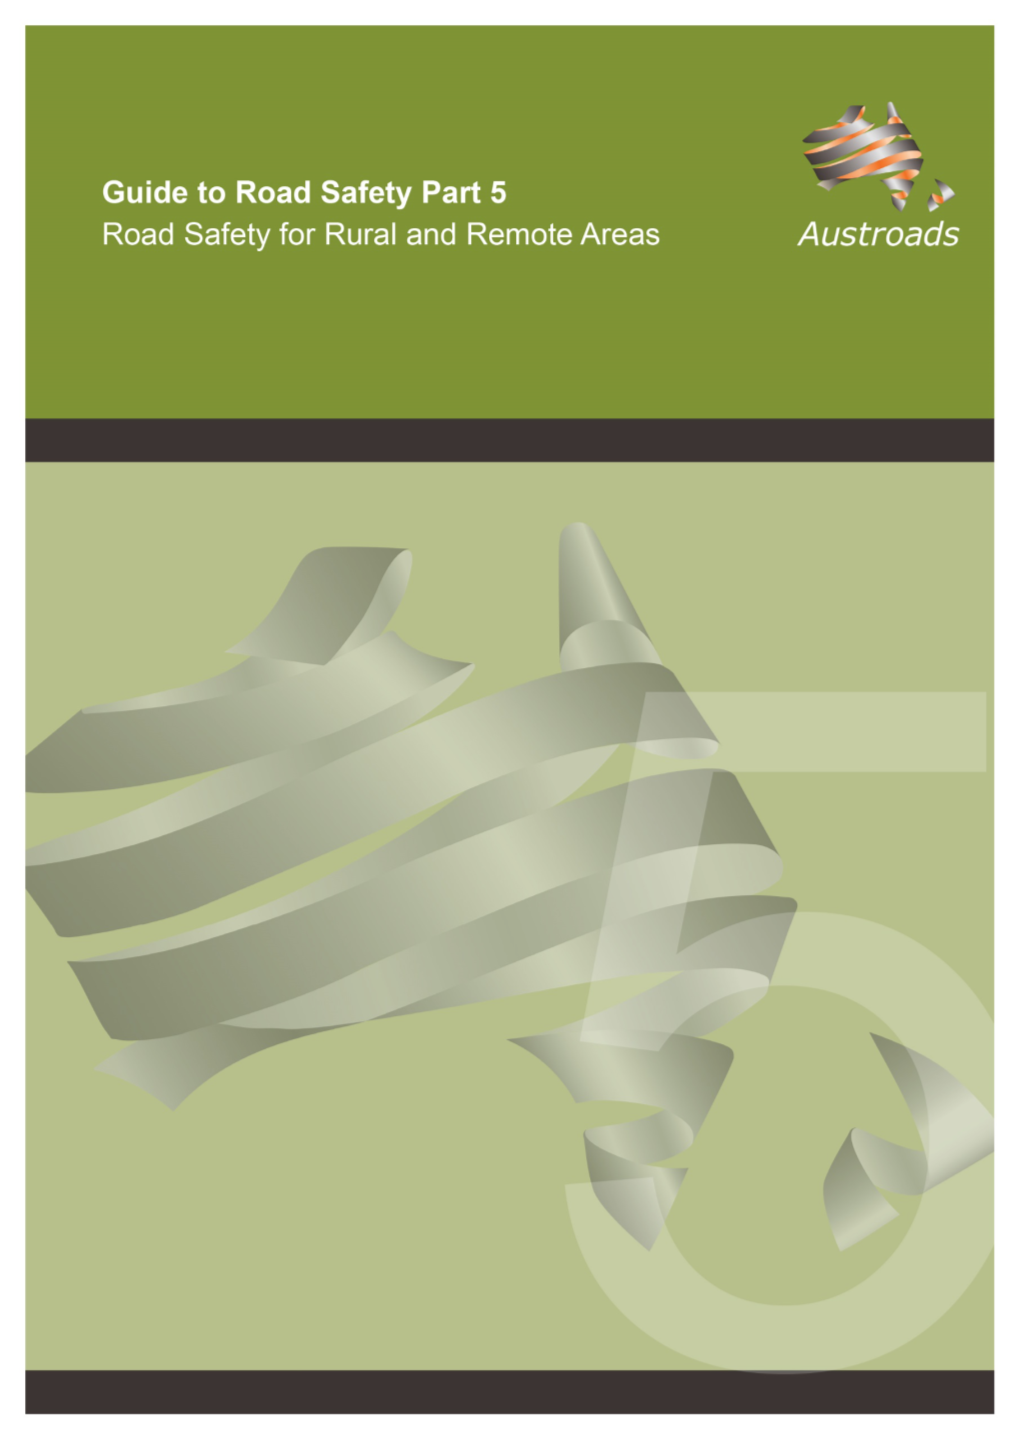 Road Safety for Rural and Remote Areas